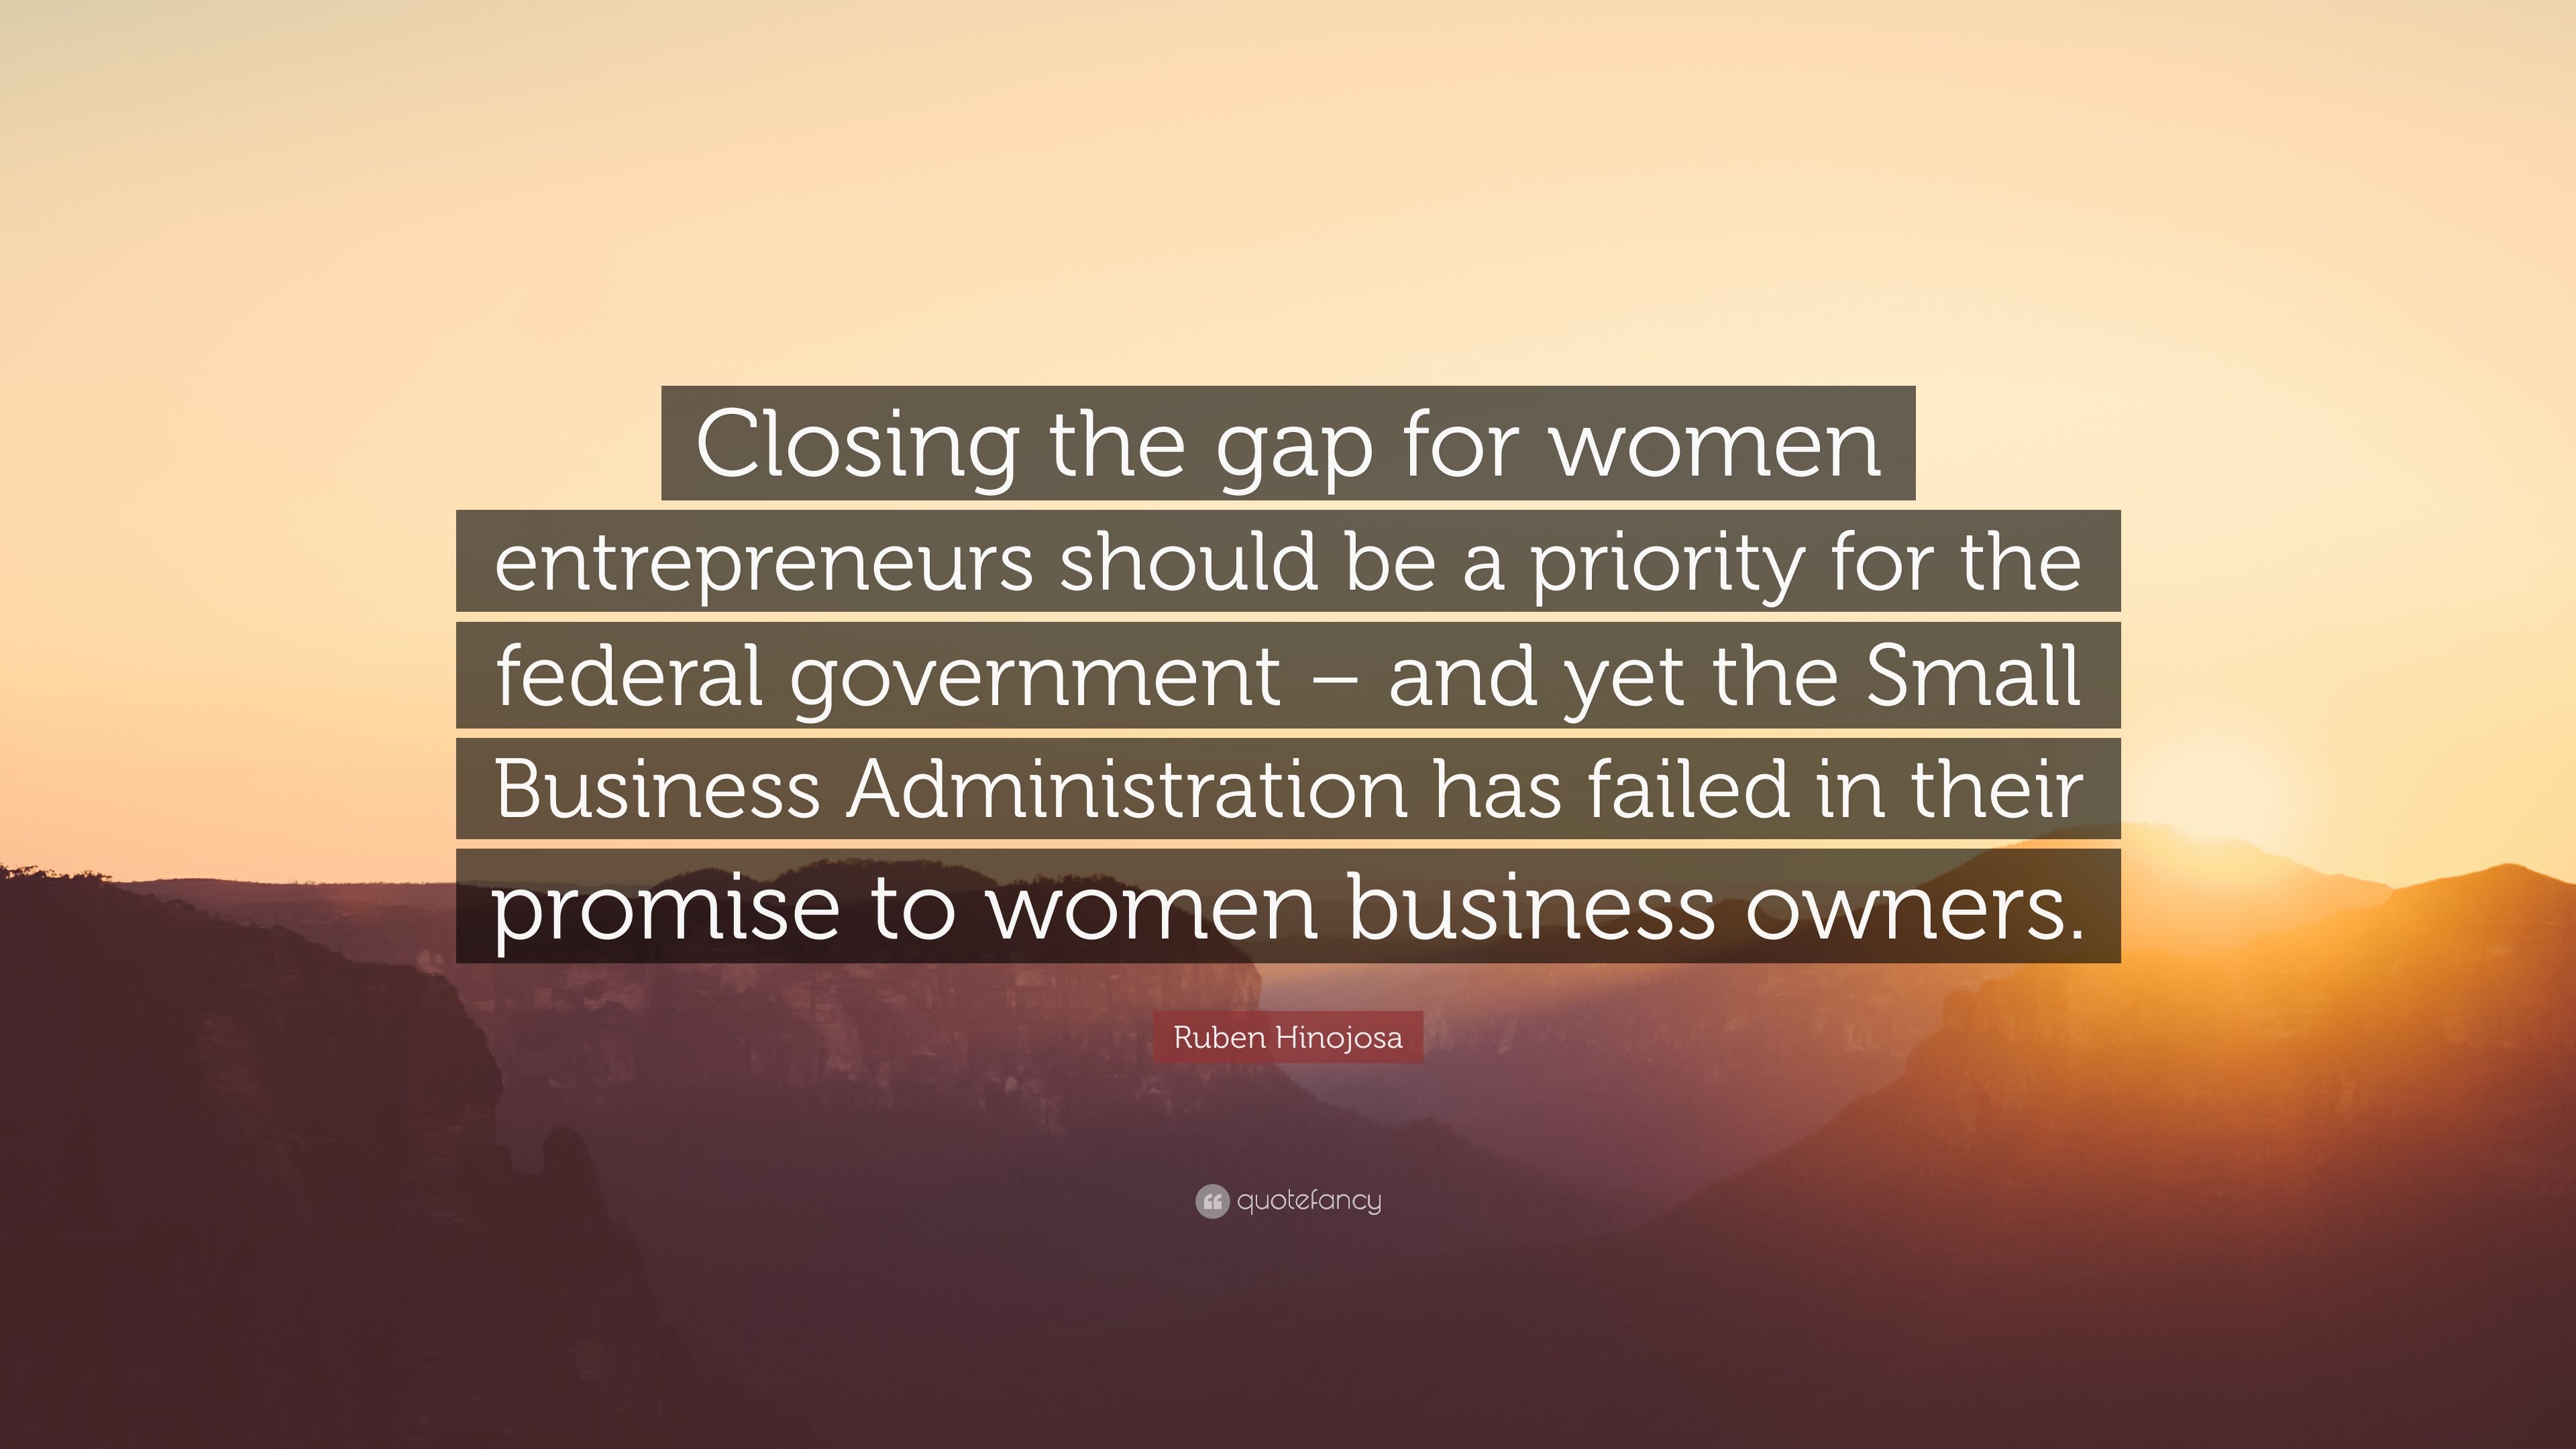 Ruben Hinojosa Quote: “Closing the gap for women entrepreneurs should be a priority for the federal government